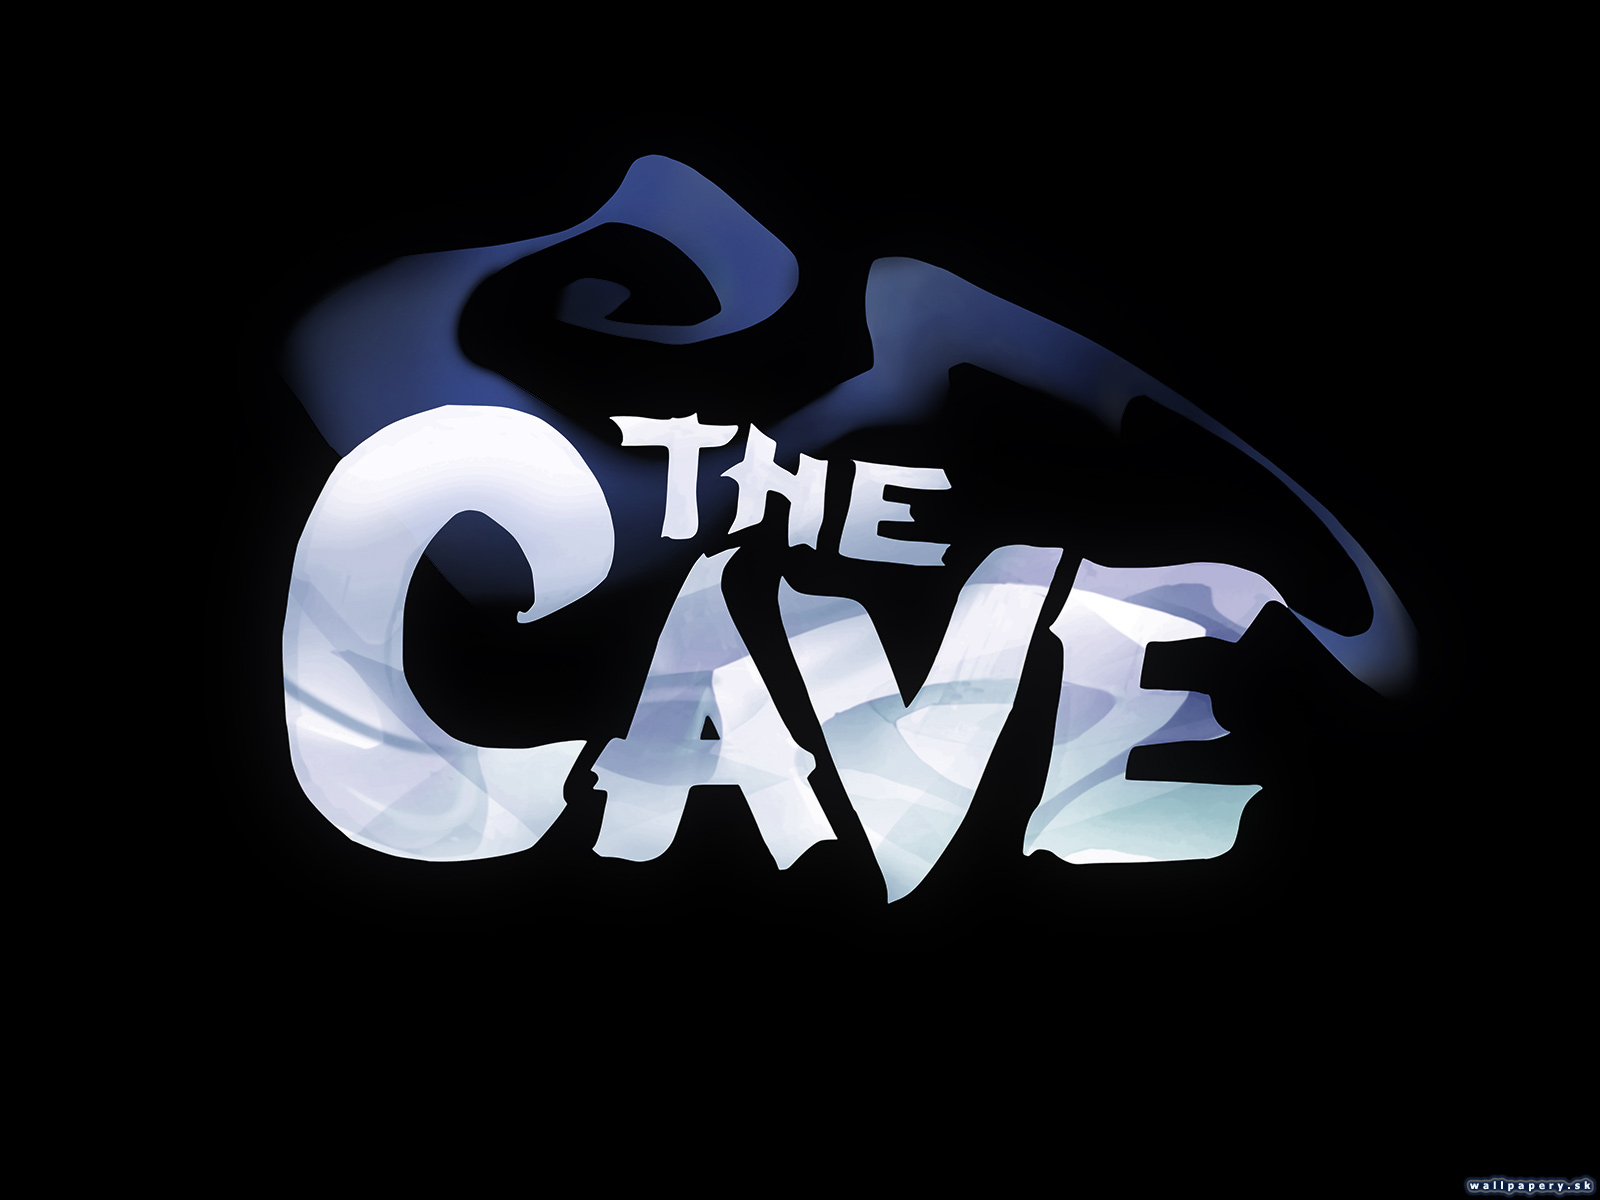 The Cave - wallpaper 4